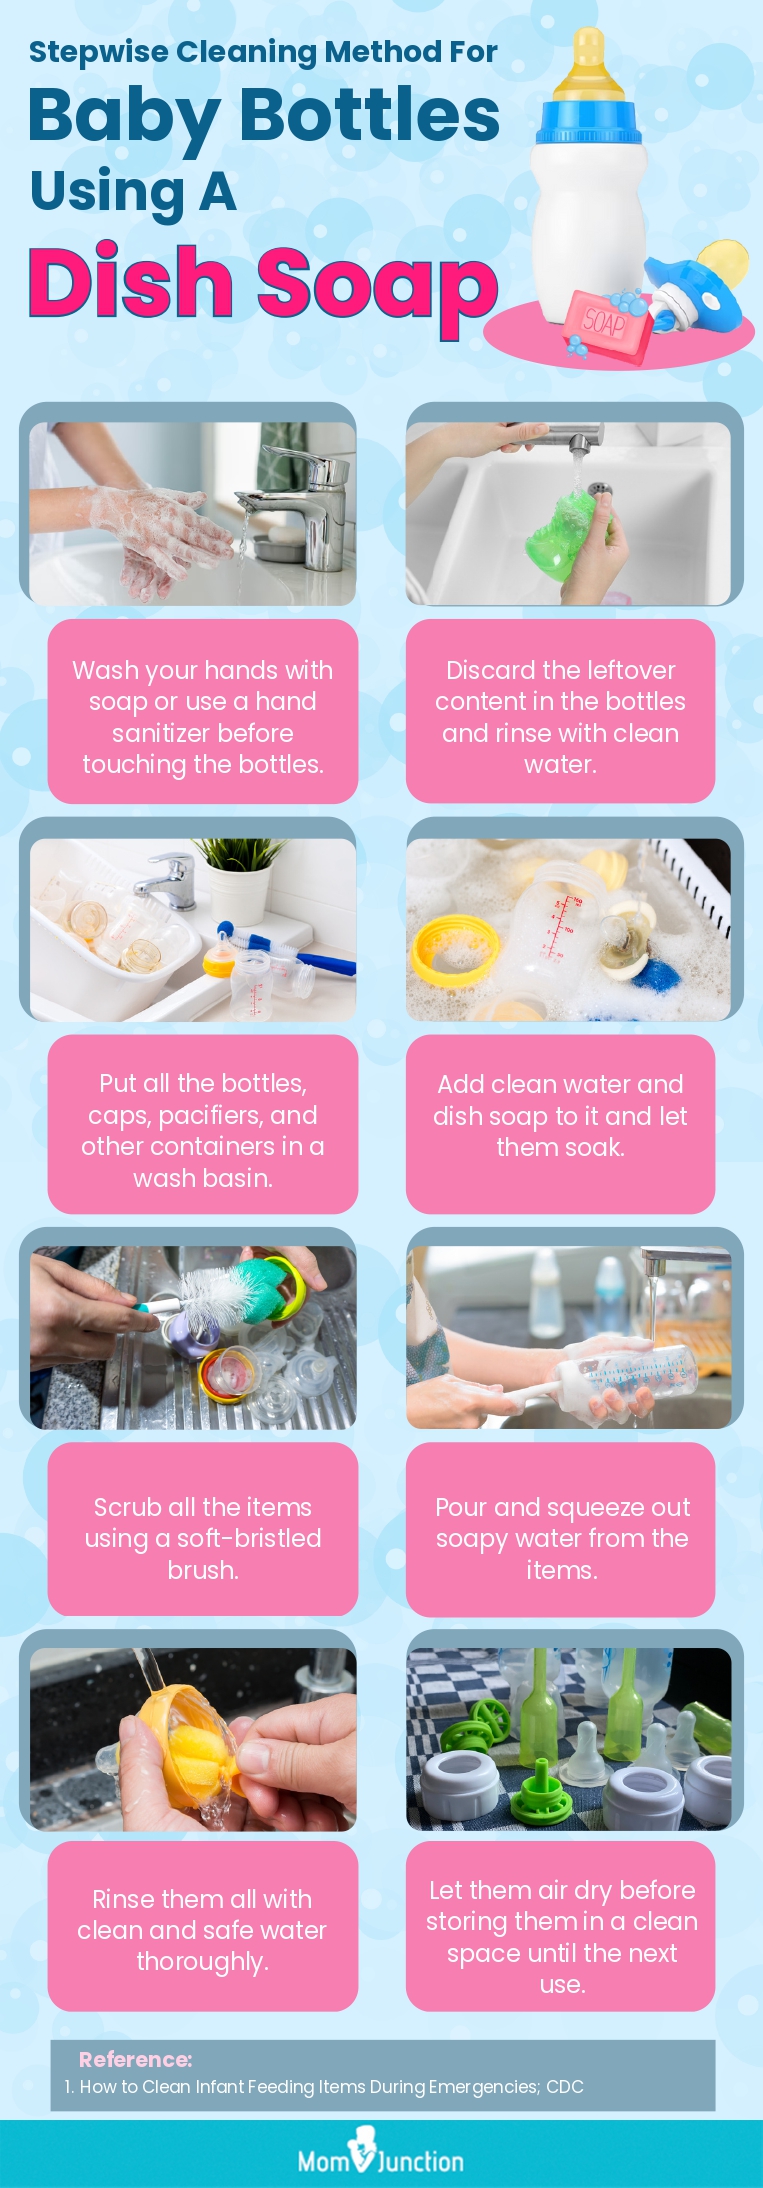 Stepwise Cleaning Method For Baby Bottles Using A Dish Soap (infographic)